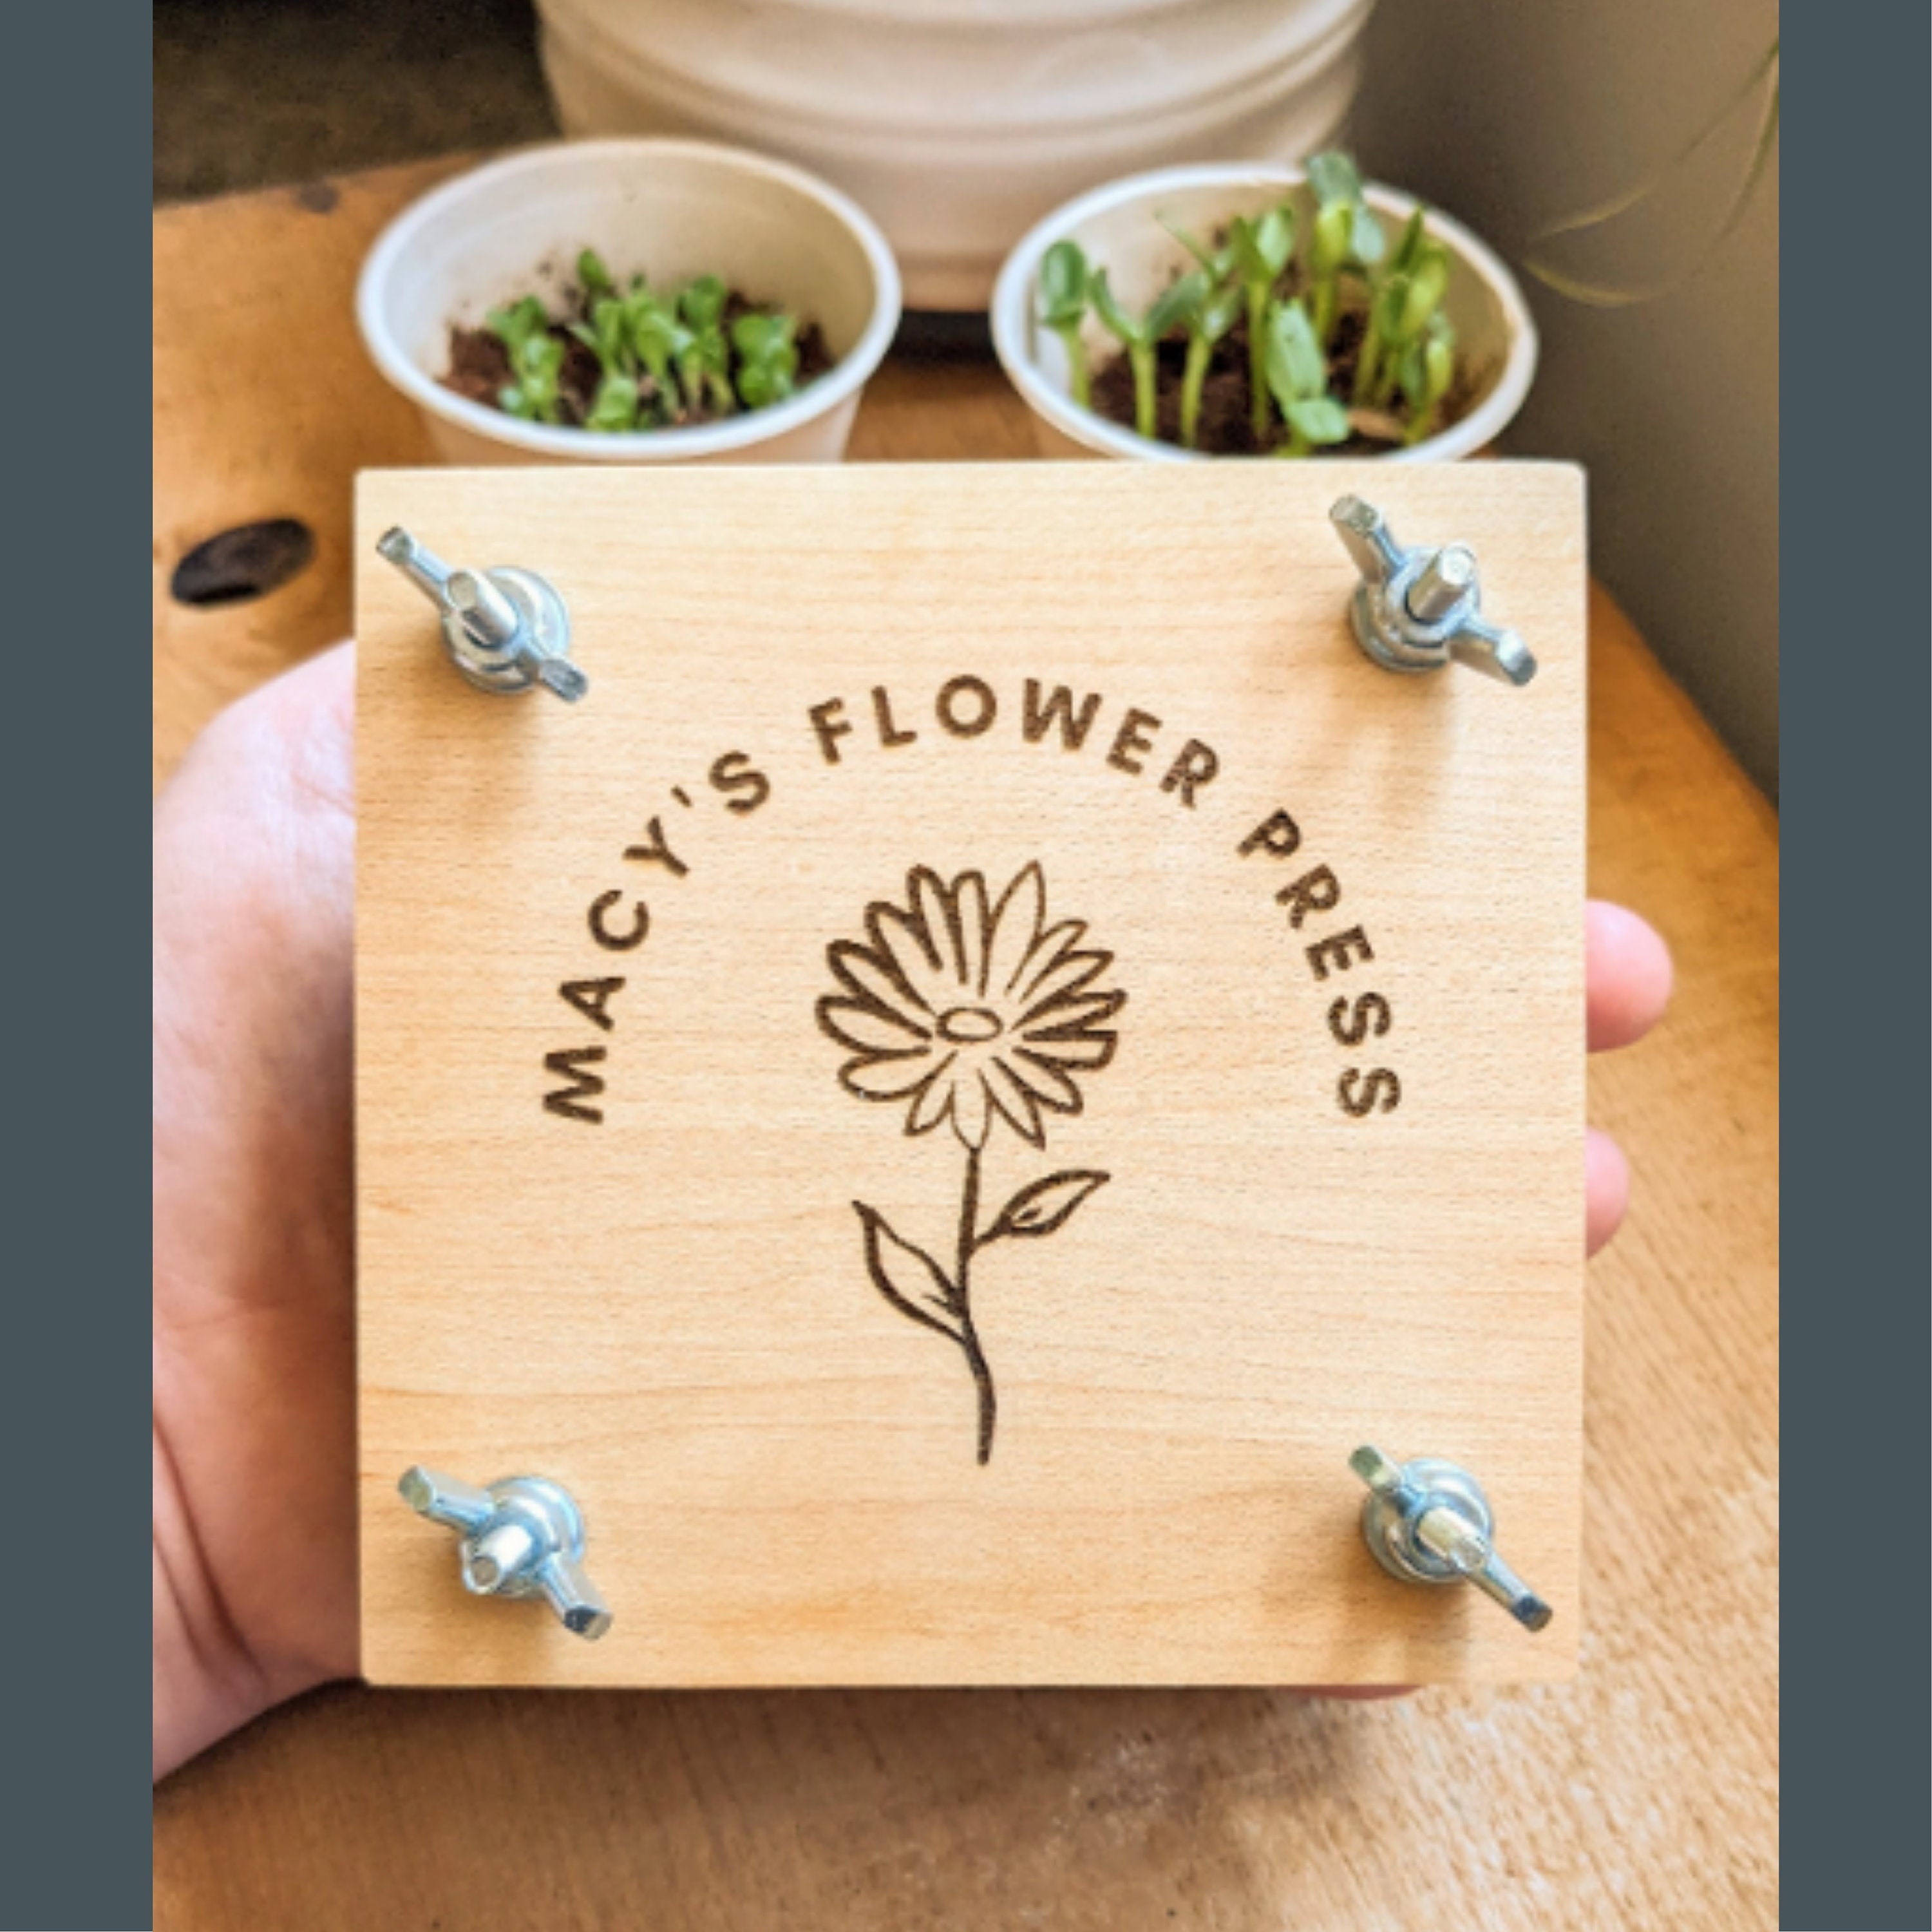 Wooden Flower Press for Adults Large Flower Press Kit Measures 27.5cm  10.8'' X 17.8cm 6.9'' Great Gift for Arts and Crafts Lovers 